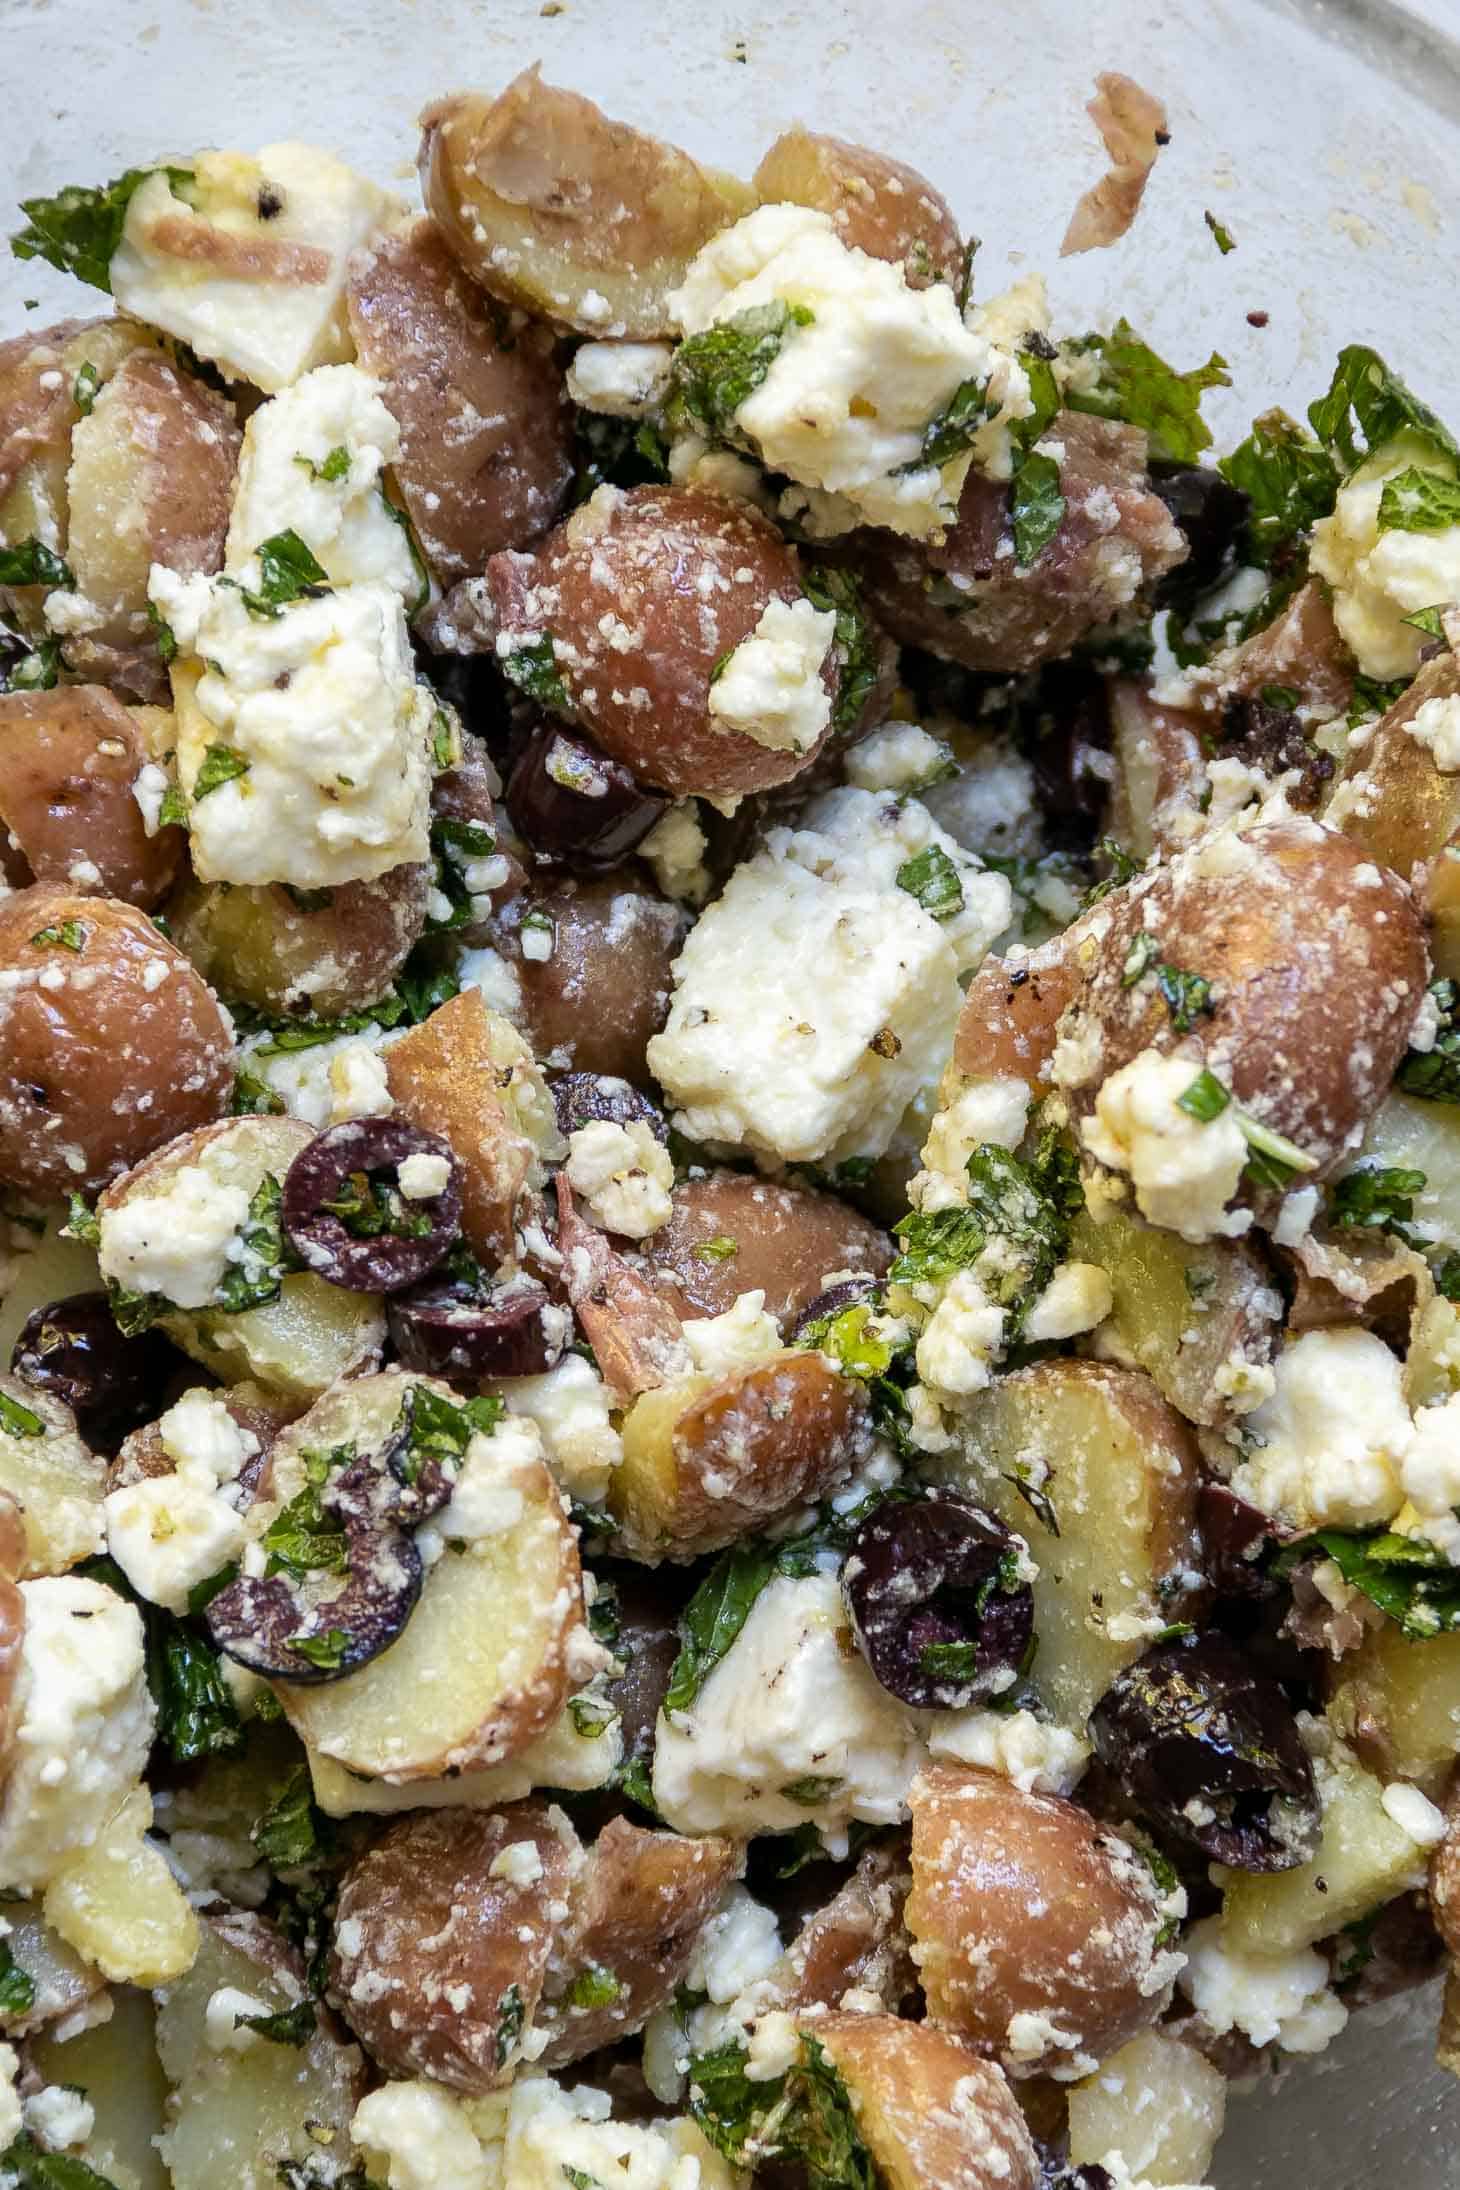 Red Potato Salad with Olives and Feta cheese